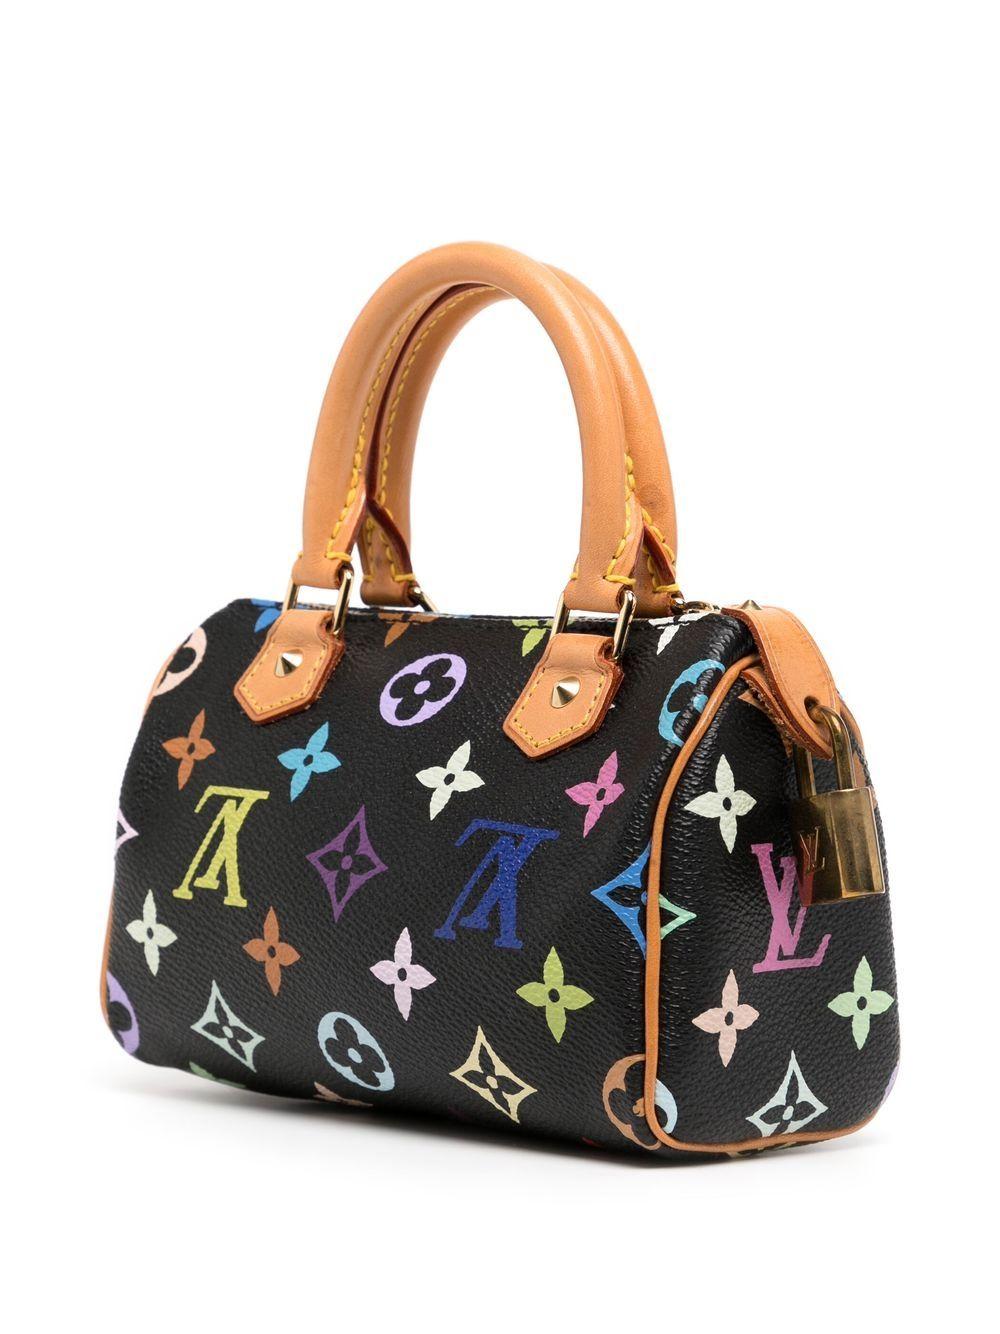 Described by Marc Jacobs as a “monumental marriage between art and business” the Louis Vuitton x Takashi Murakami mini Speedy handbag boasts a bright palette replacing the brand’s classic brown monogram. Injecting hot pink, turquoise, yellow and